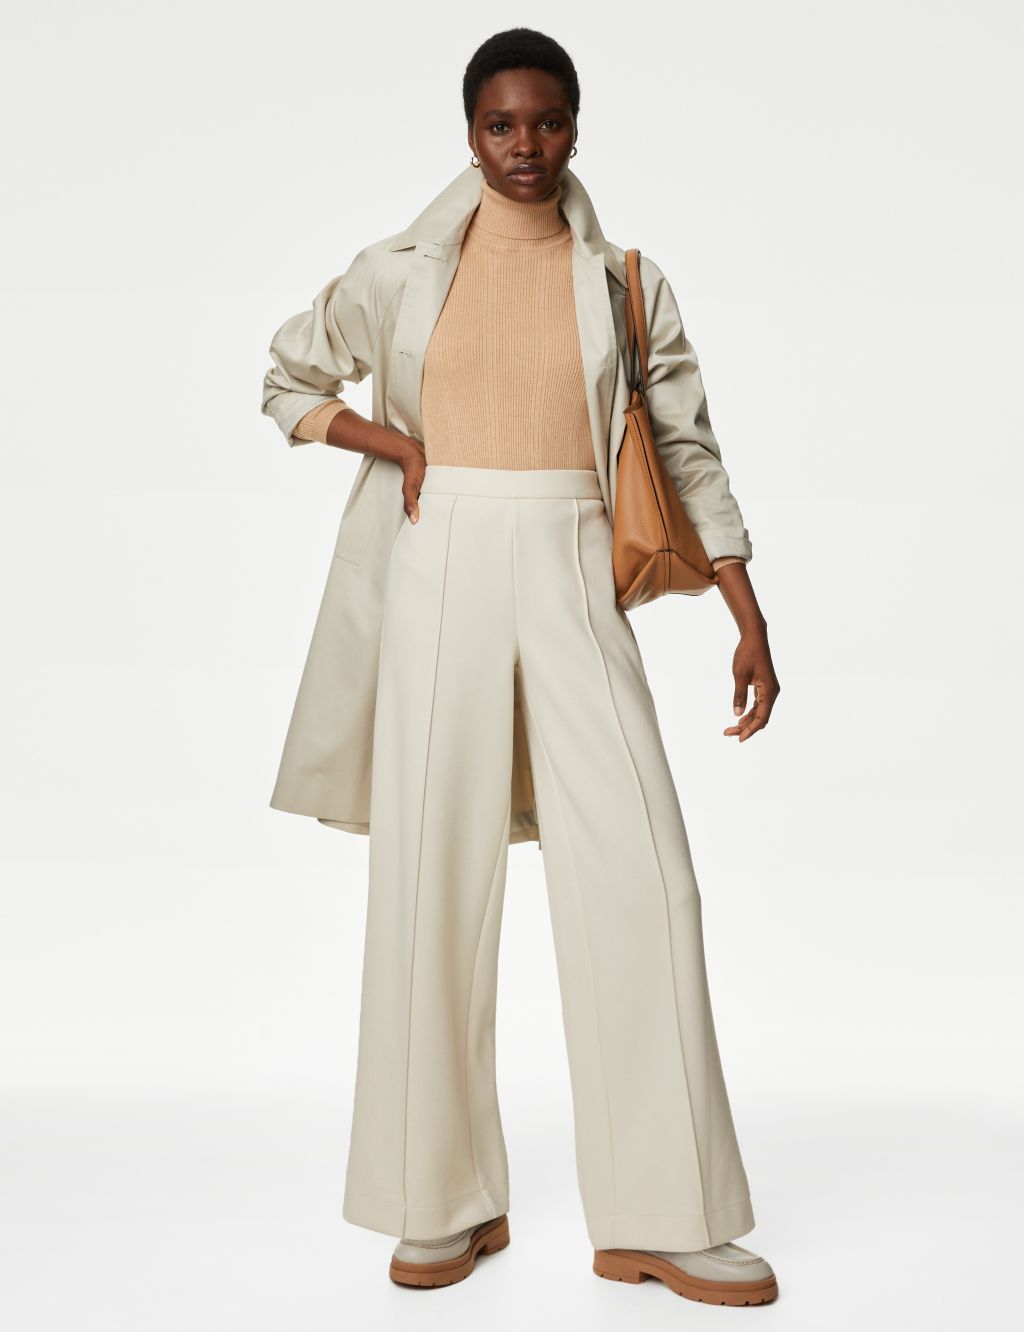 Jersey Elasticated Waist Flared Trousers, M&S Collection